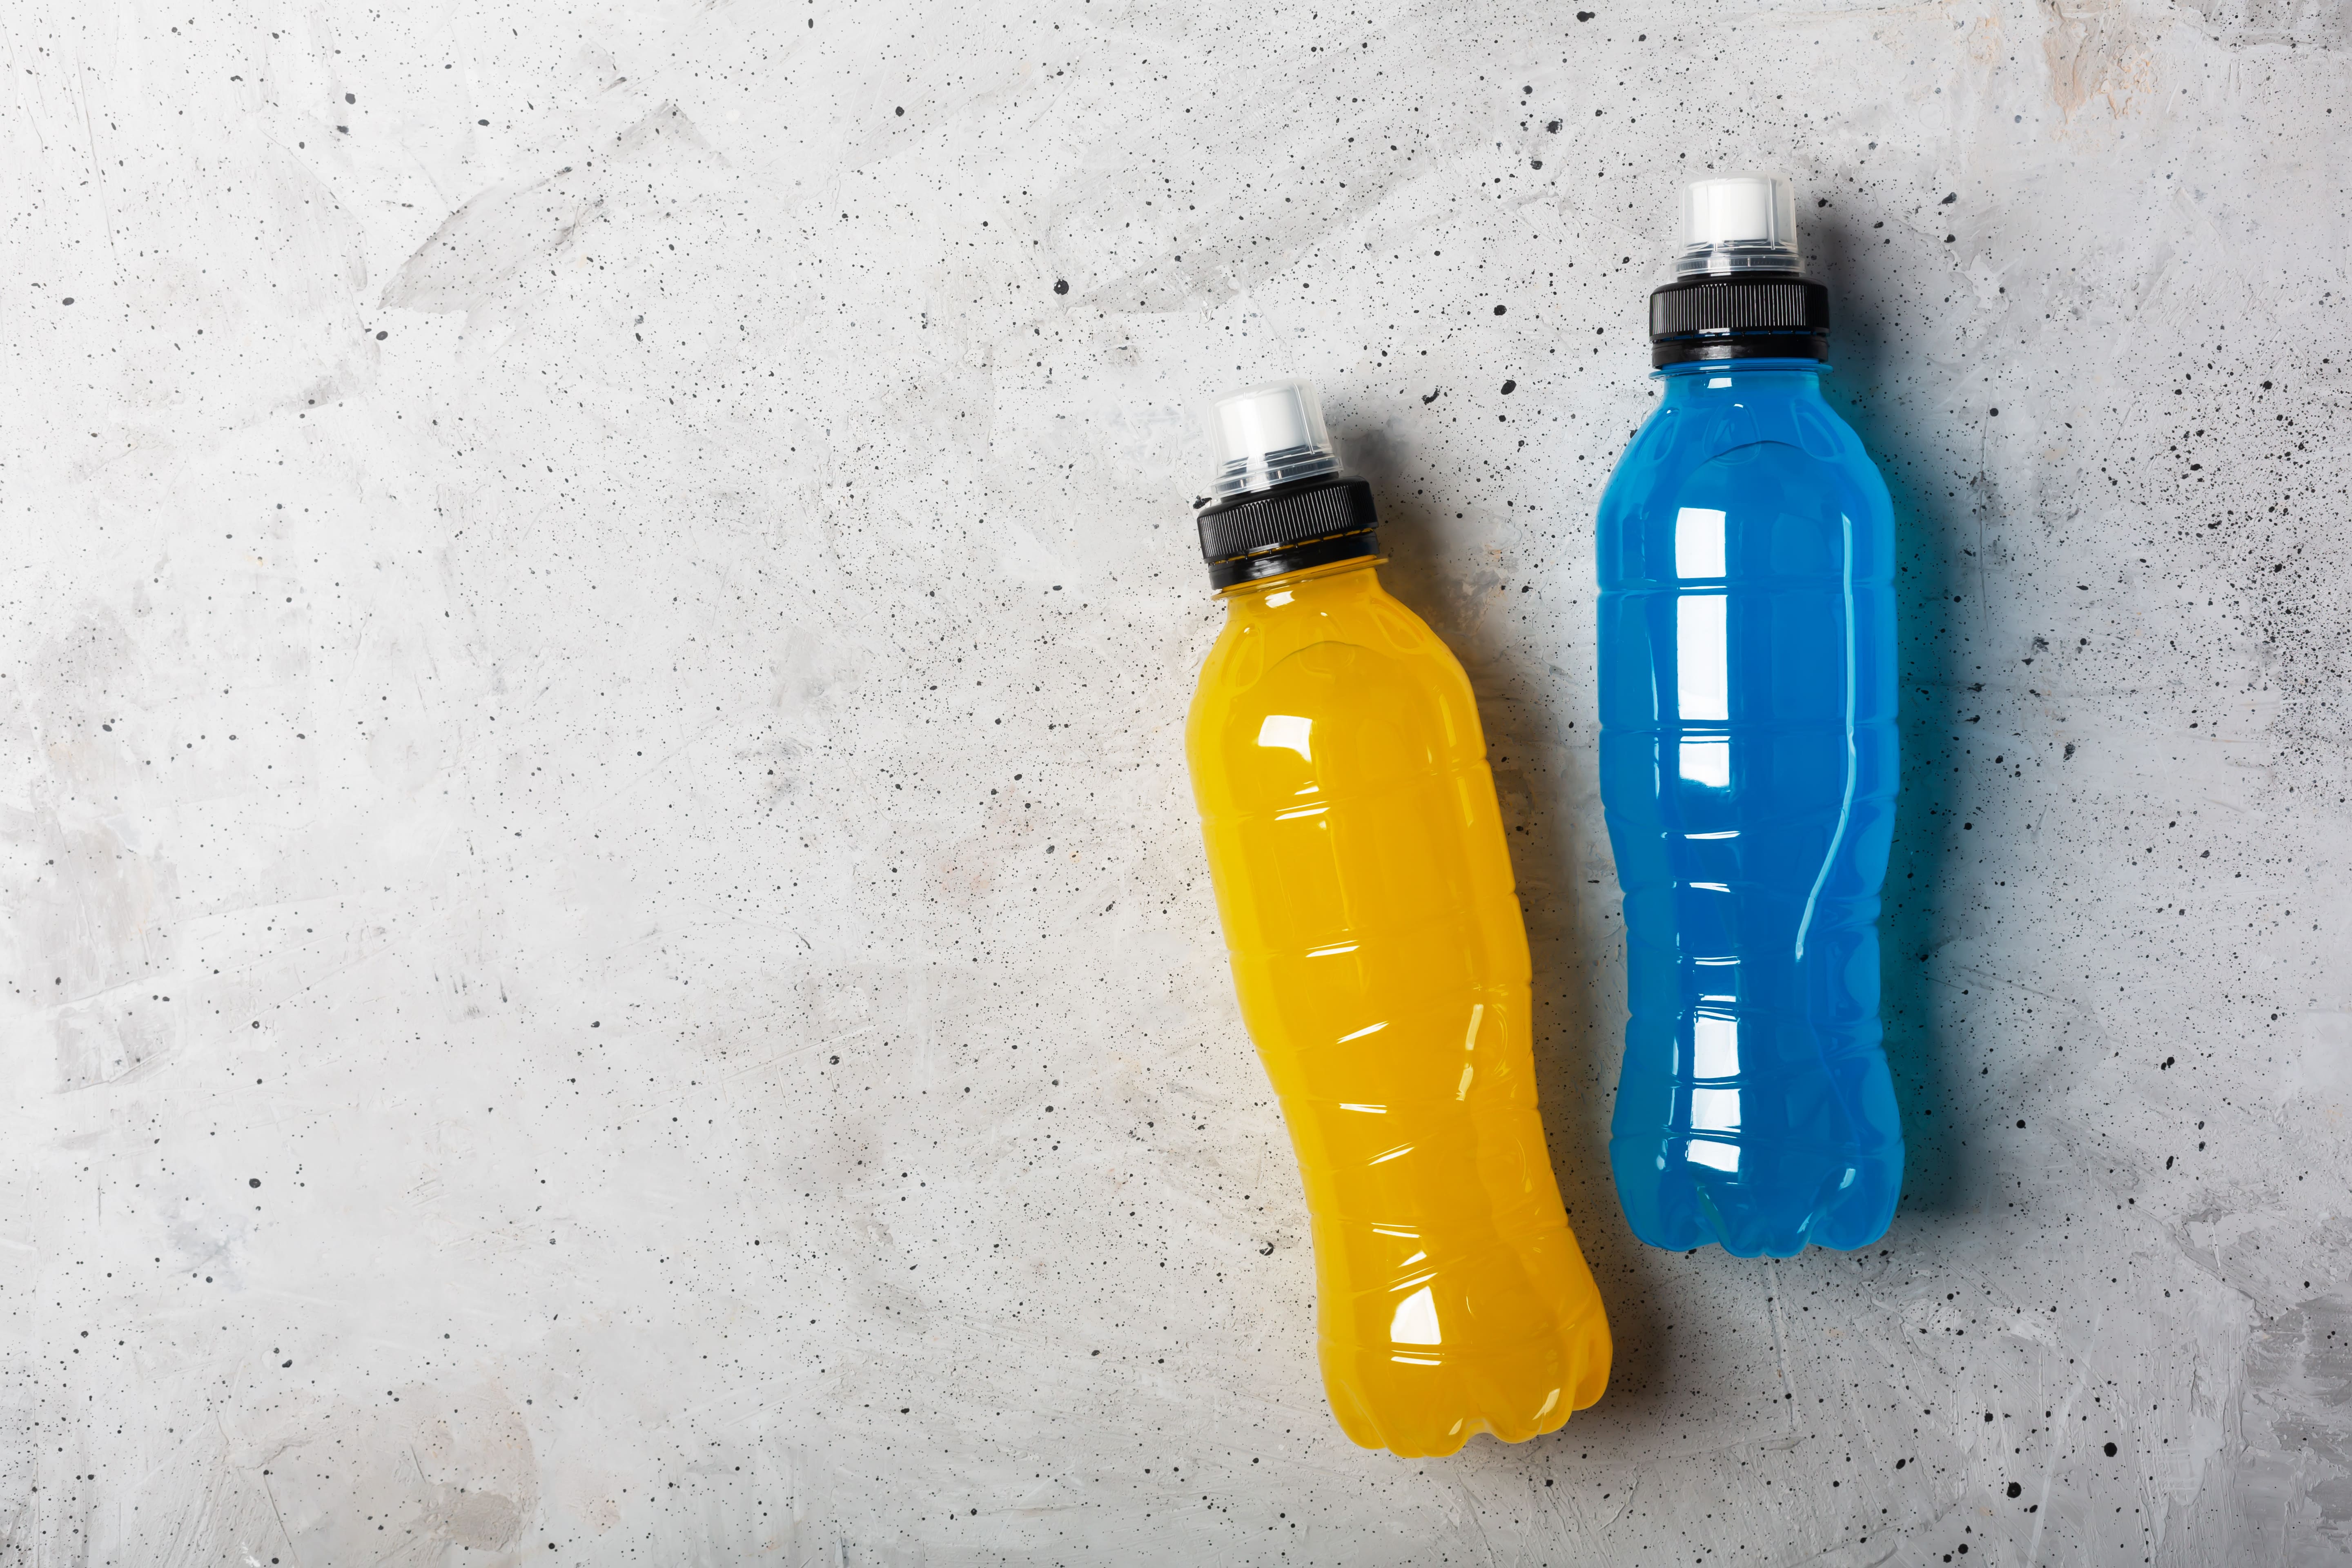 Two plastic bottles filled with energy drinks lie on their side on a granite kitchen surface. One is blue and one is orange.